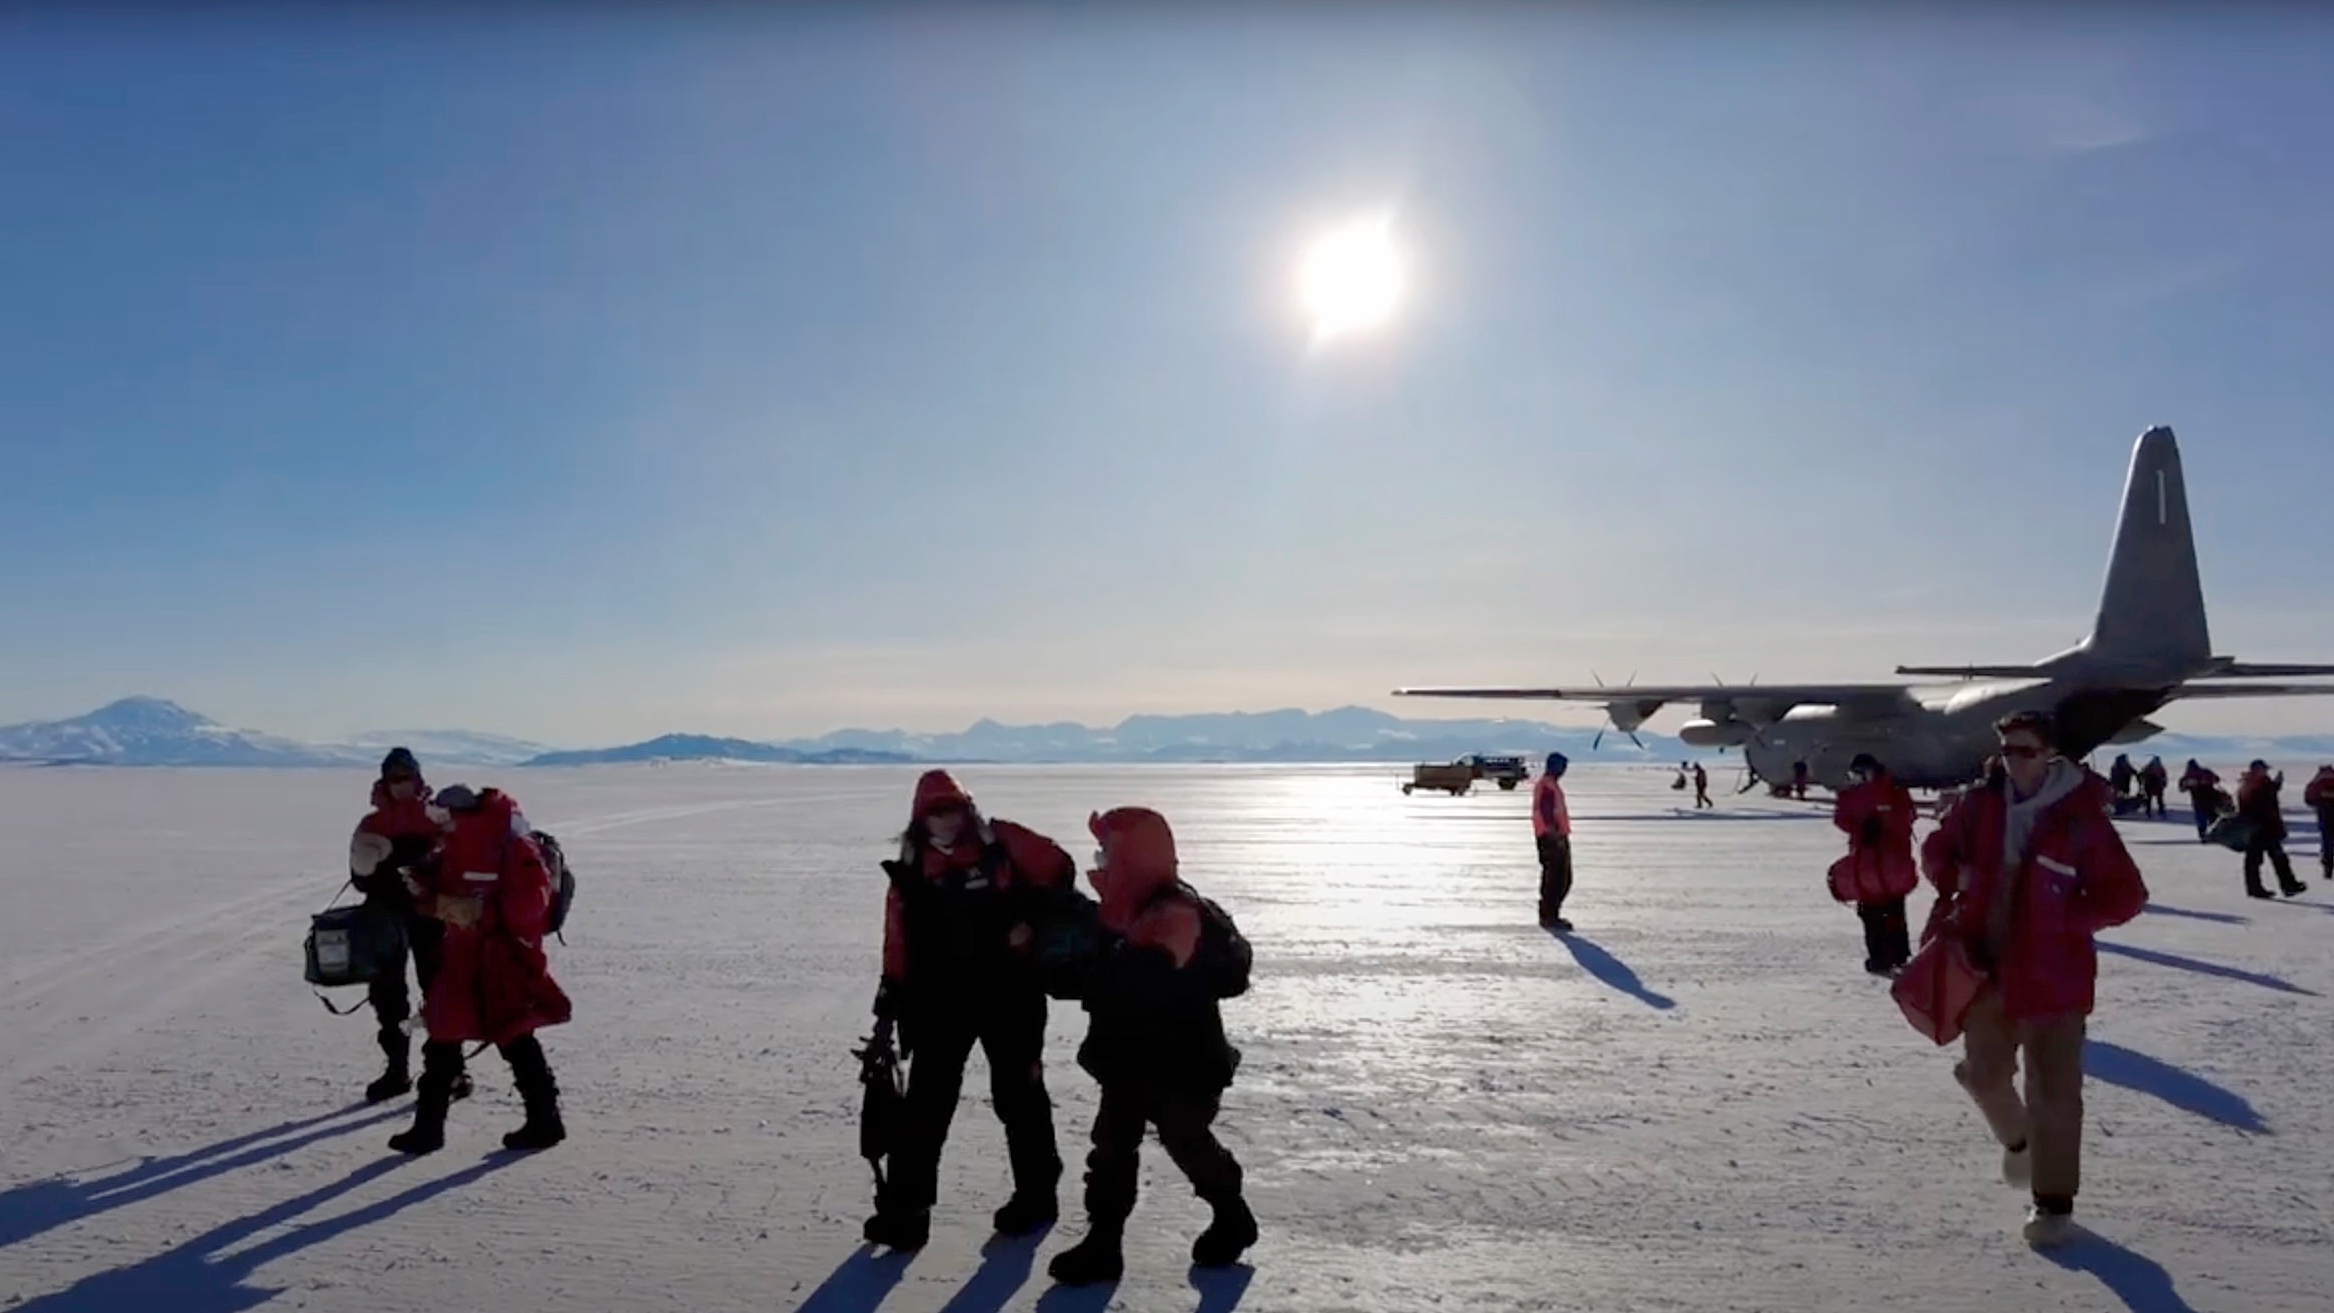 A group of people walking from an airplane in Antarctica.